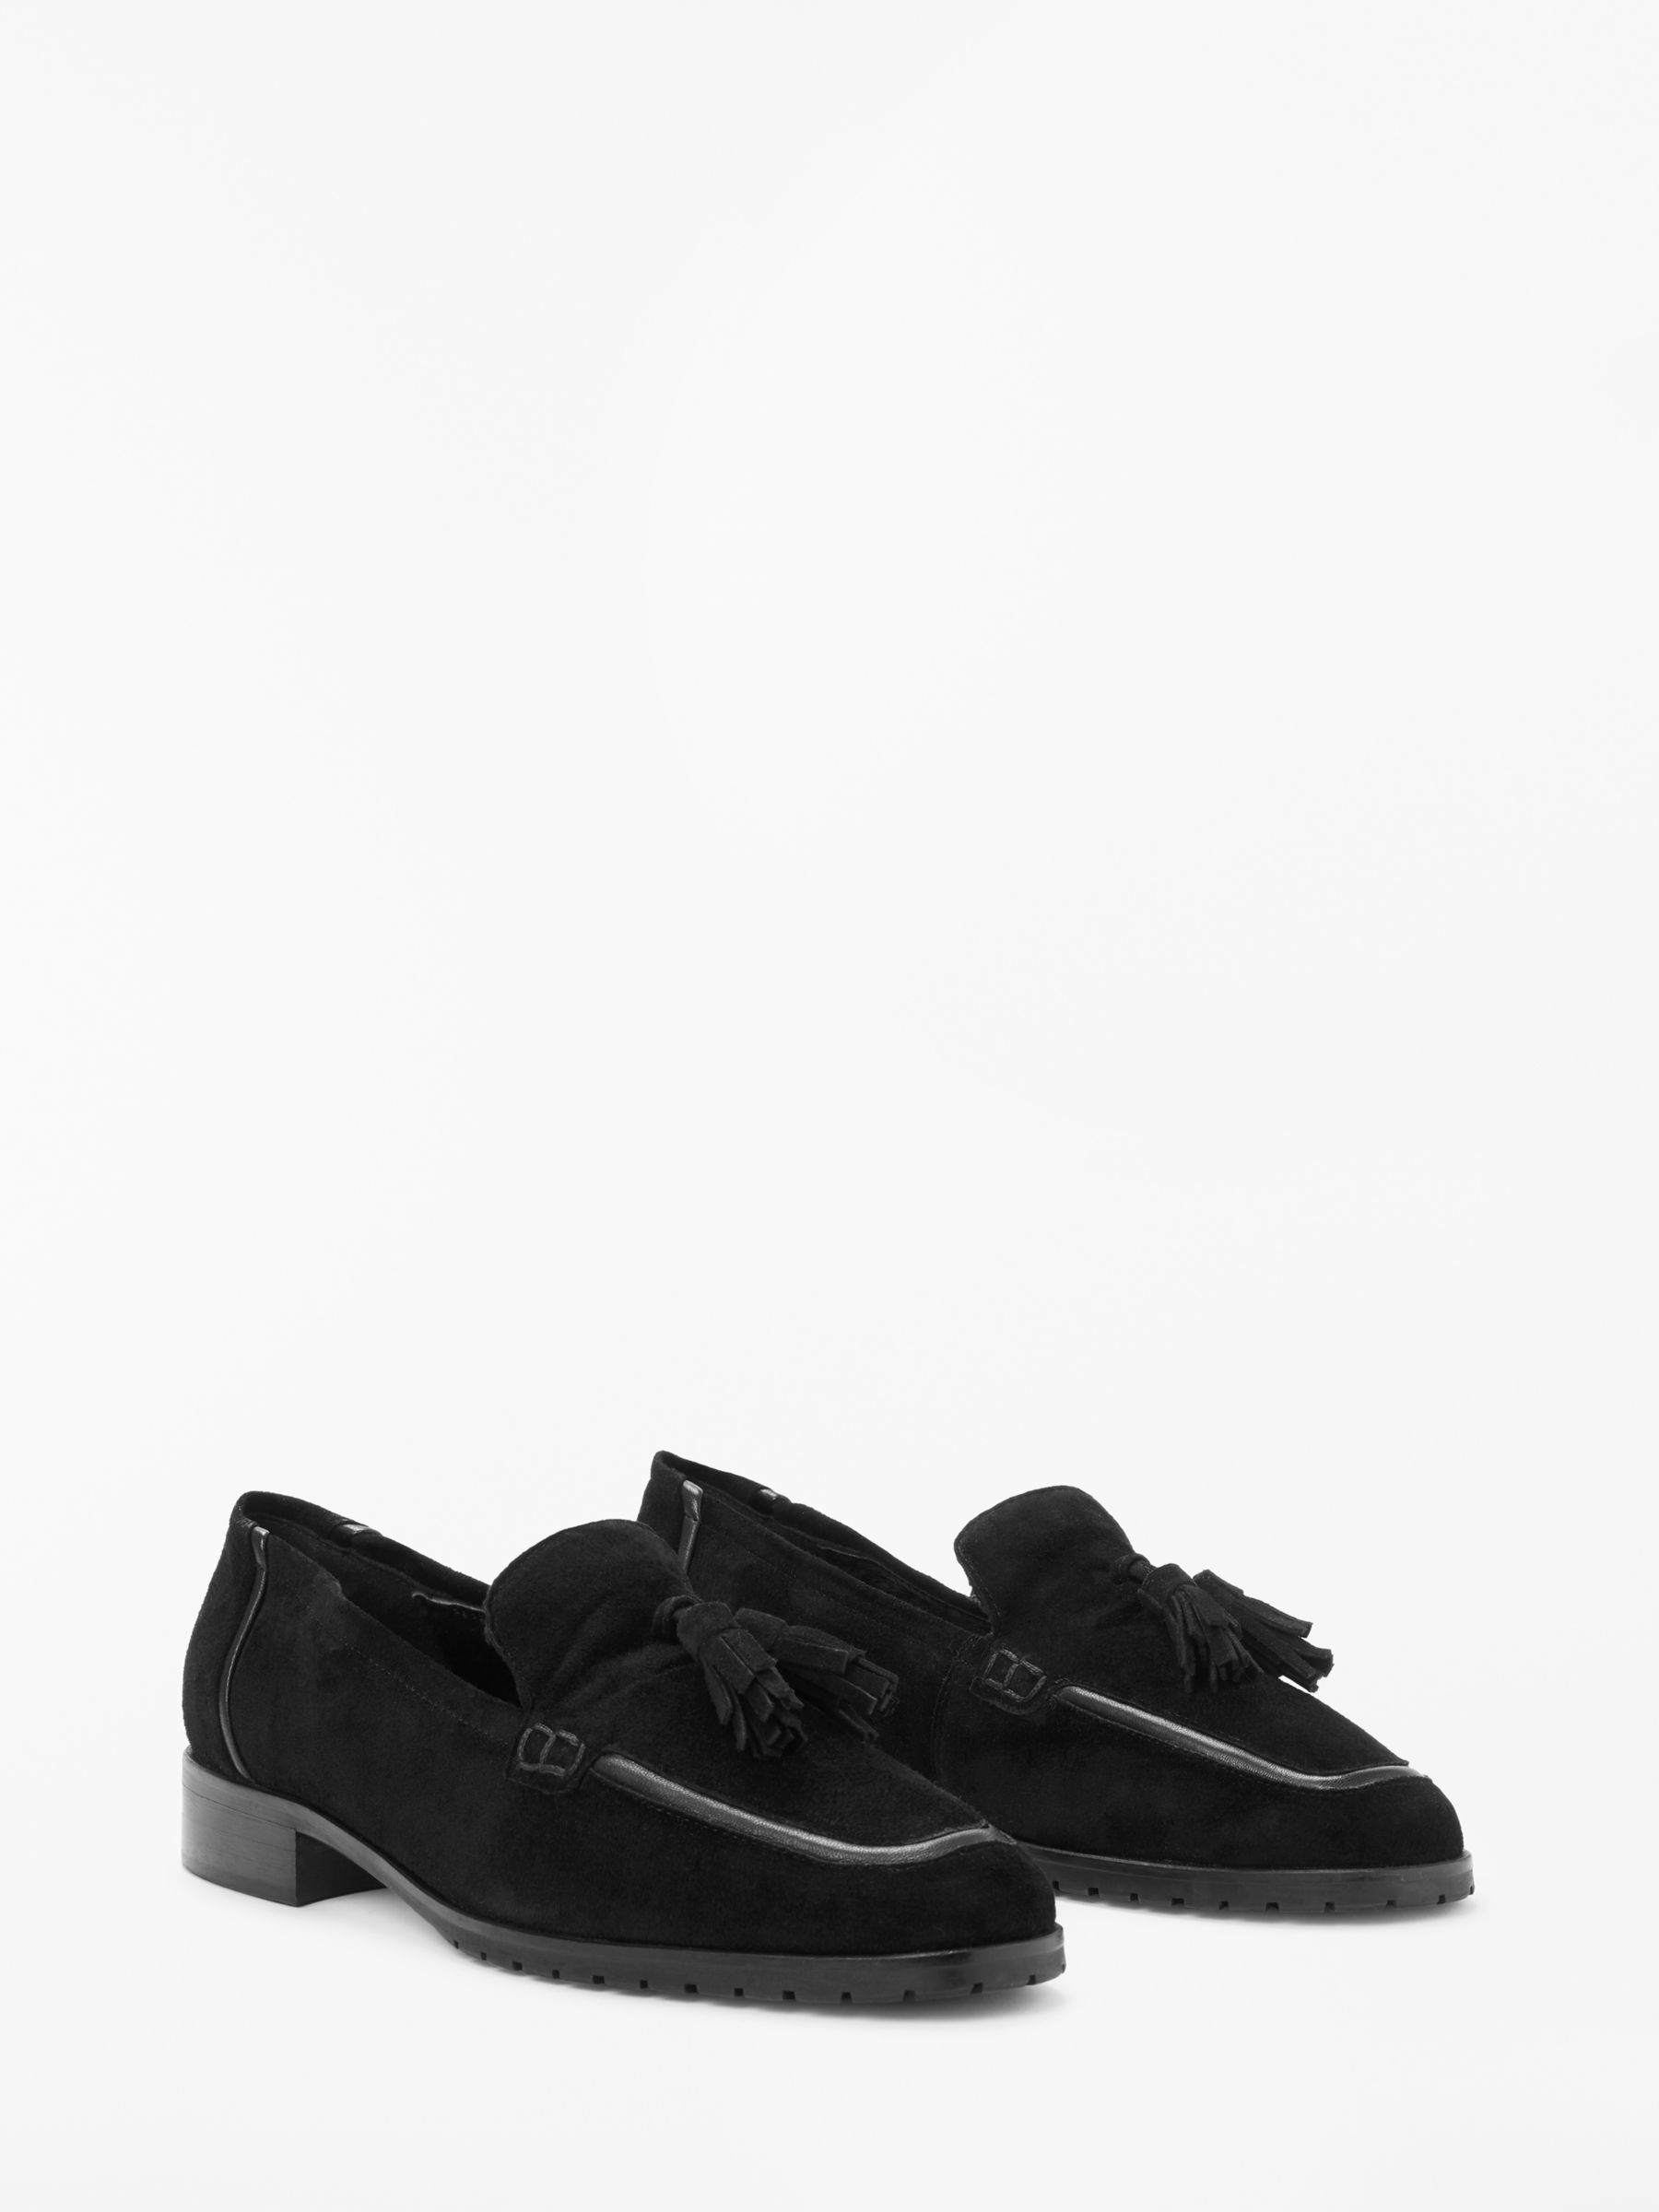 Boden Aria Shearling Lined Loafers, Black